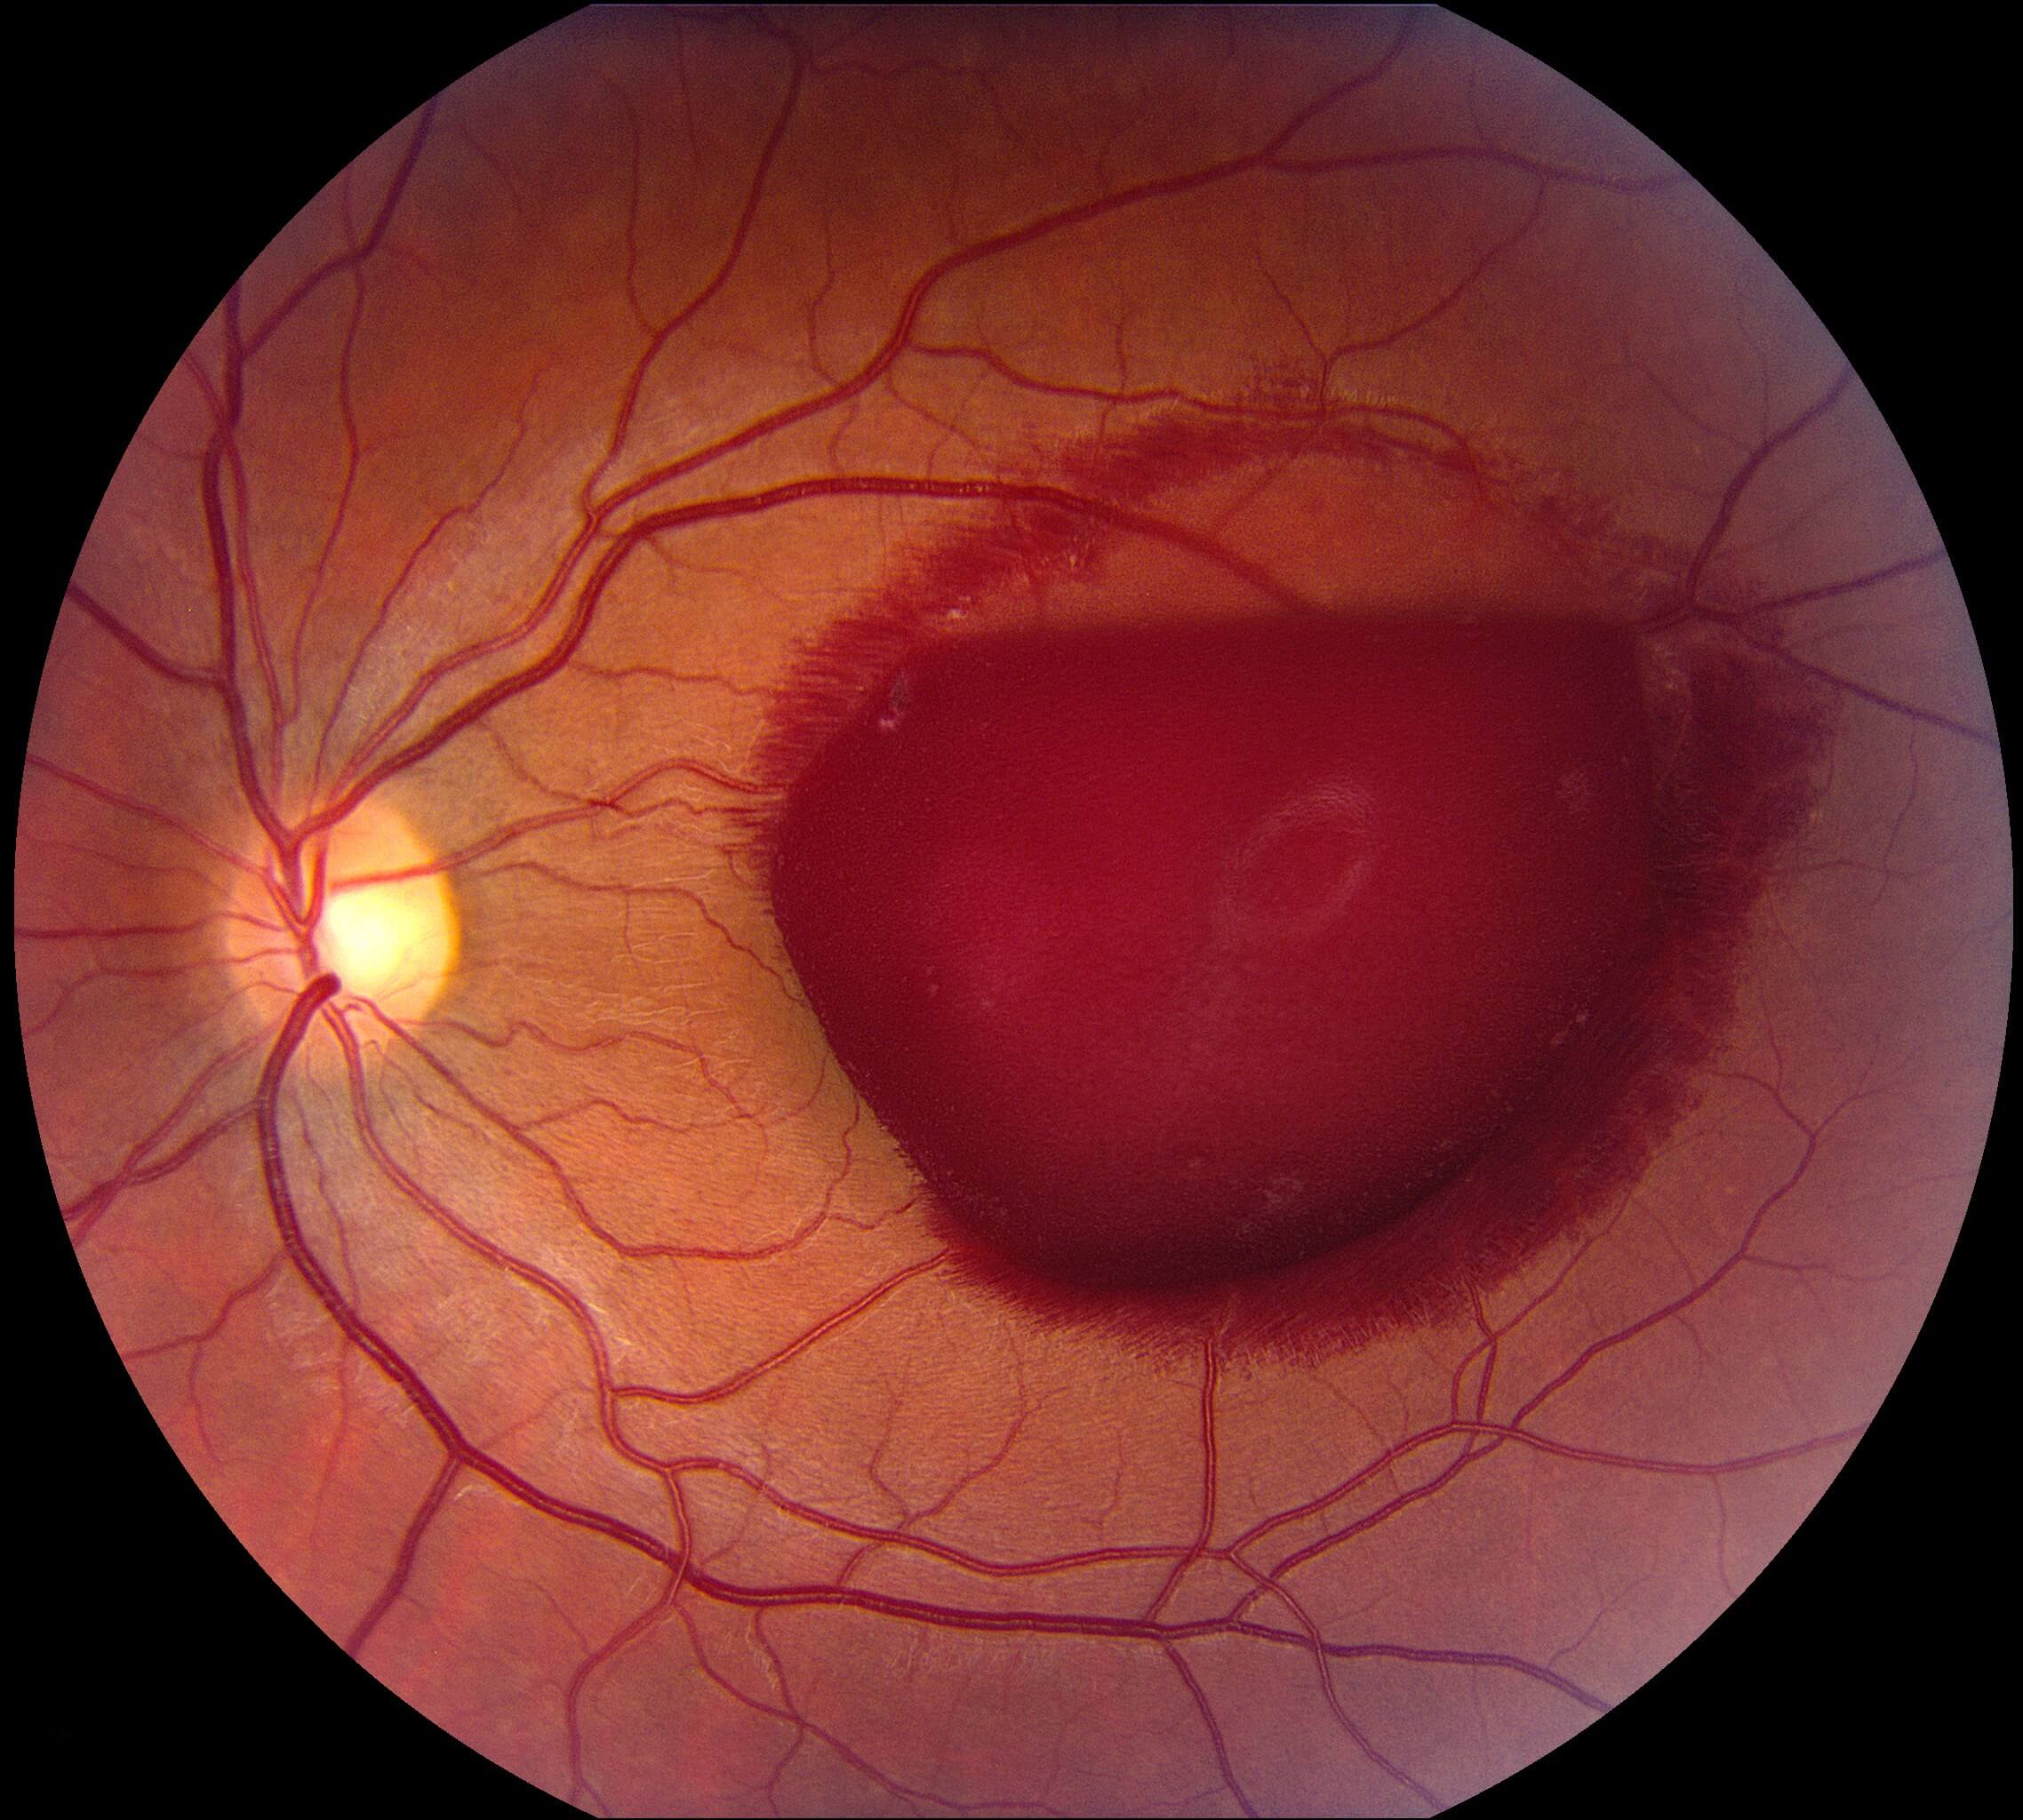 An extremely large left premacular haemorrhage due to a Valsalva manoeuver.